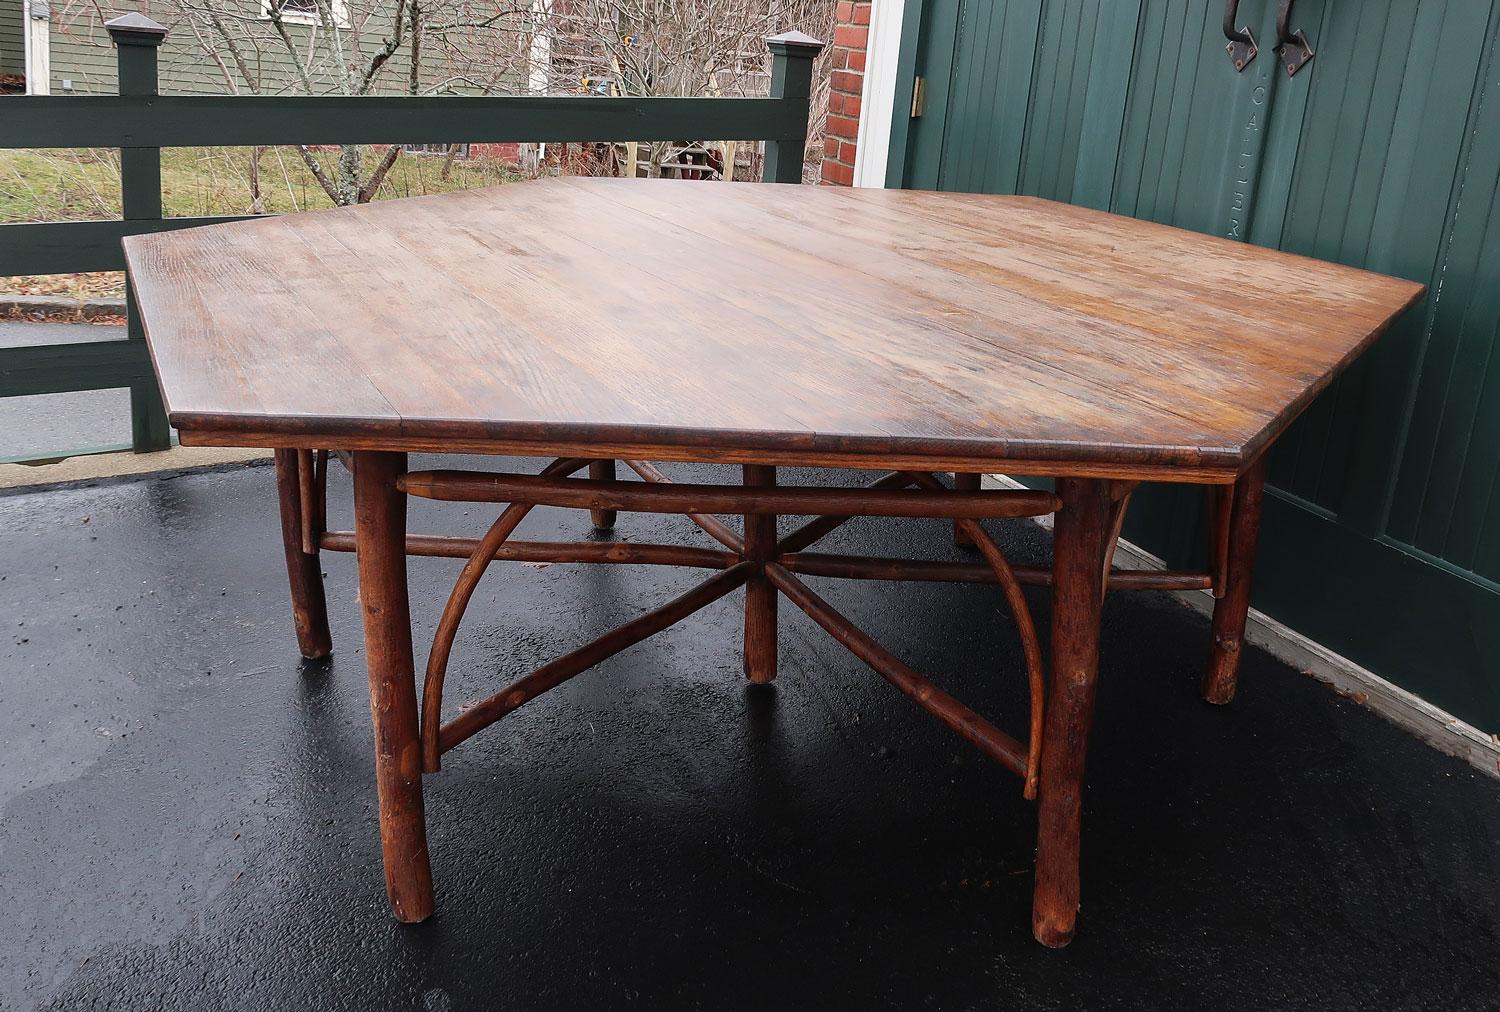 Early 20th C Old Hickory hexagonal shaped dining table. Made by Rustic Hickory Furniture Company, La Porte, Indiana. Circa 1915.

It has a hexagonal oak top and an elaborate hickory pole base with arches and crossed stretchers. It comfortably